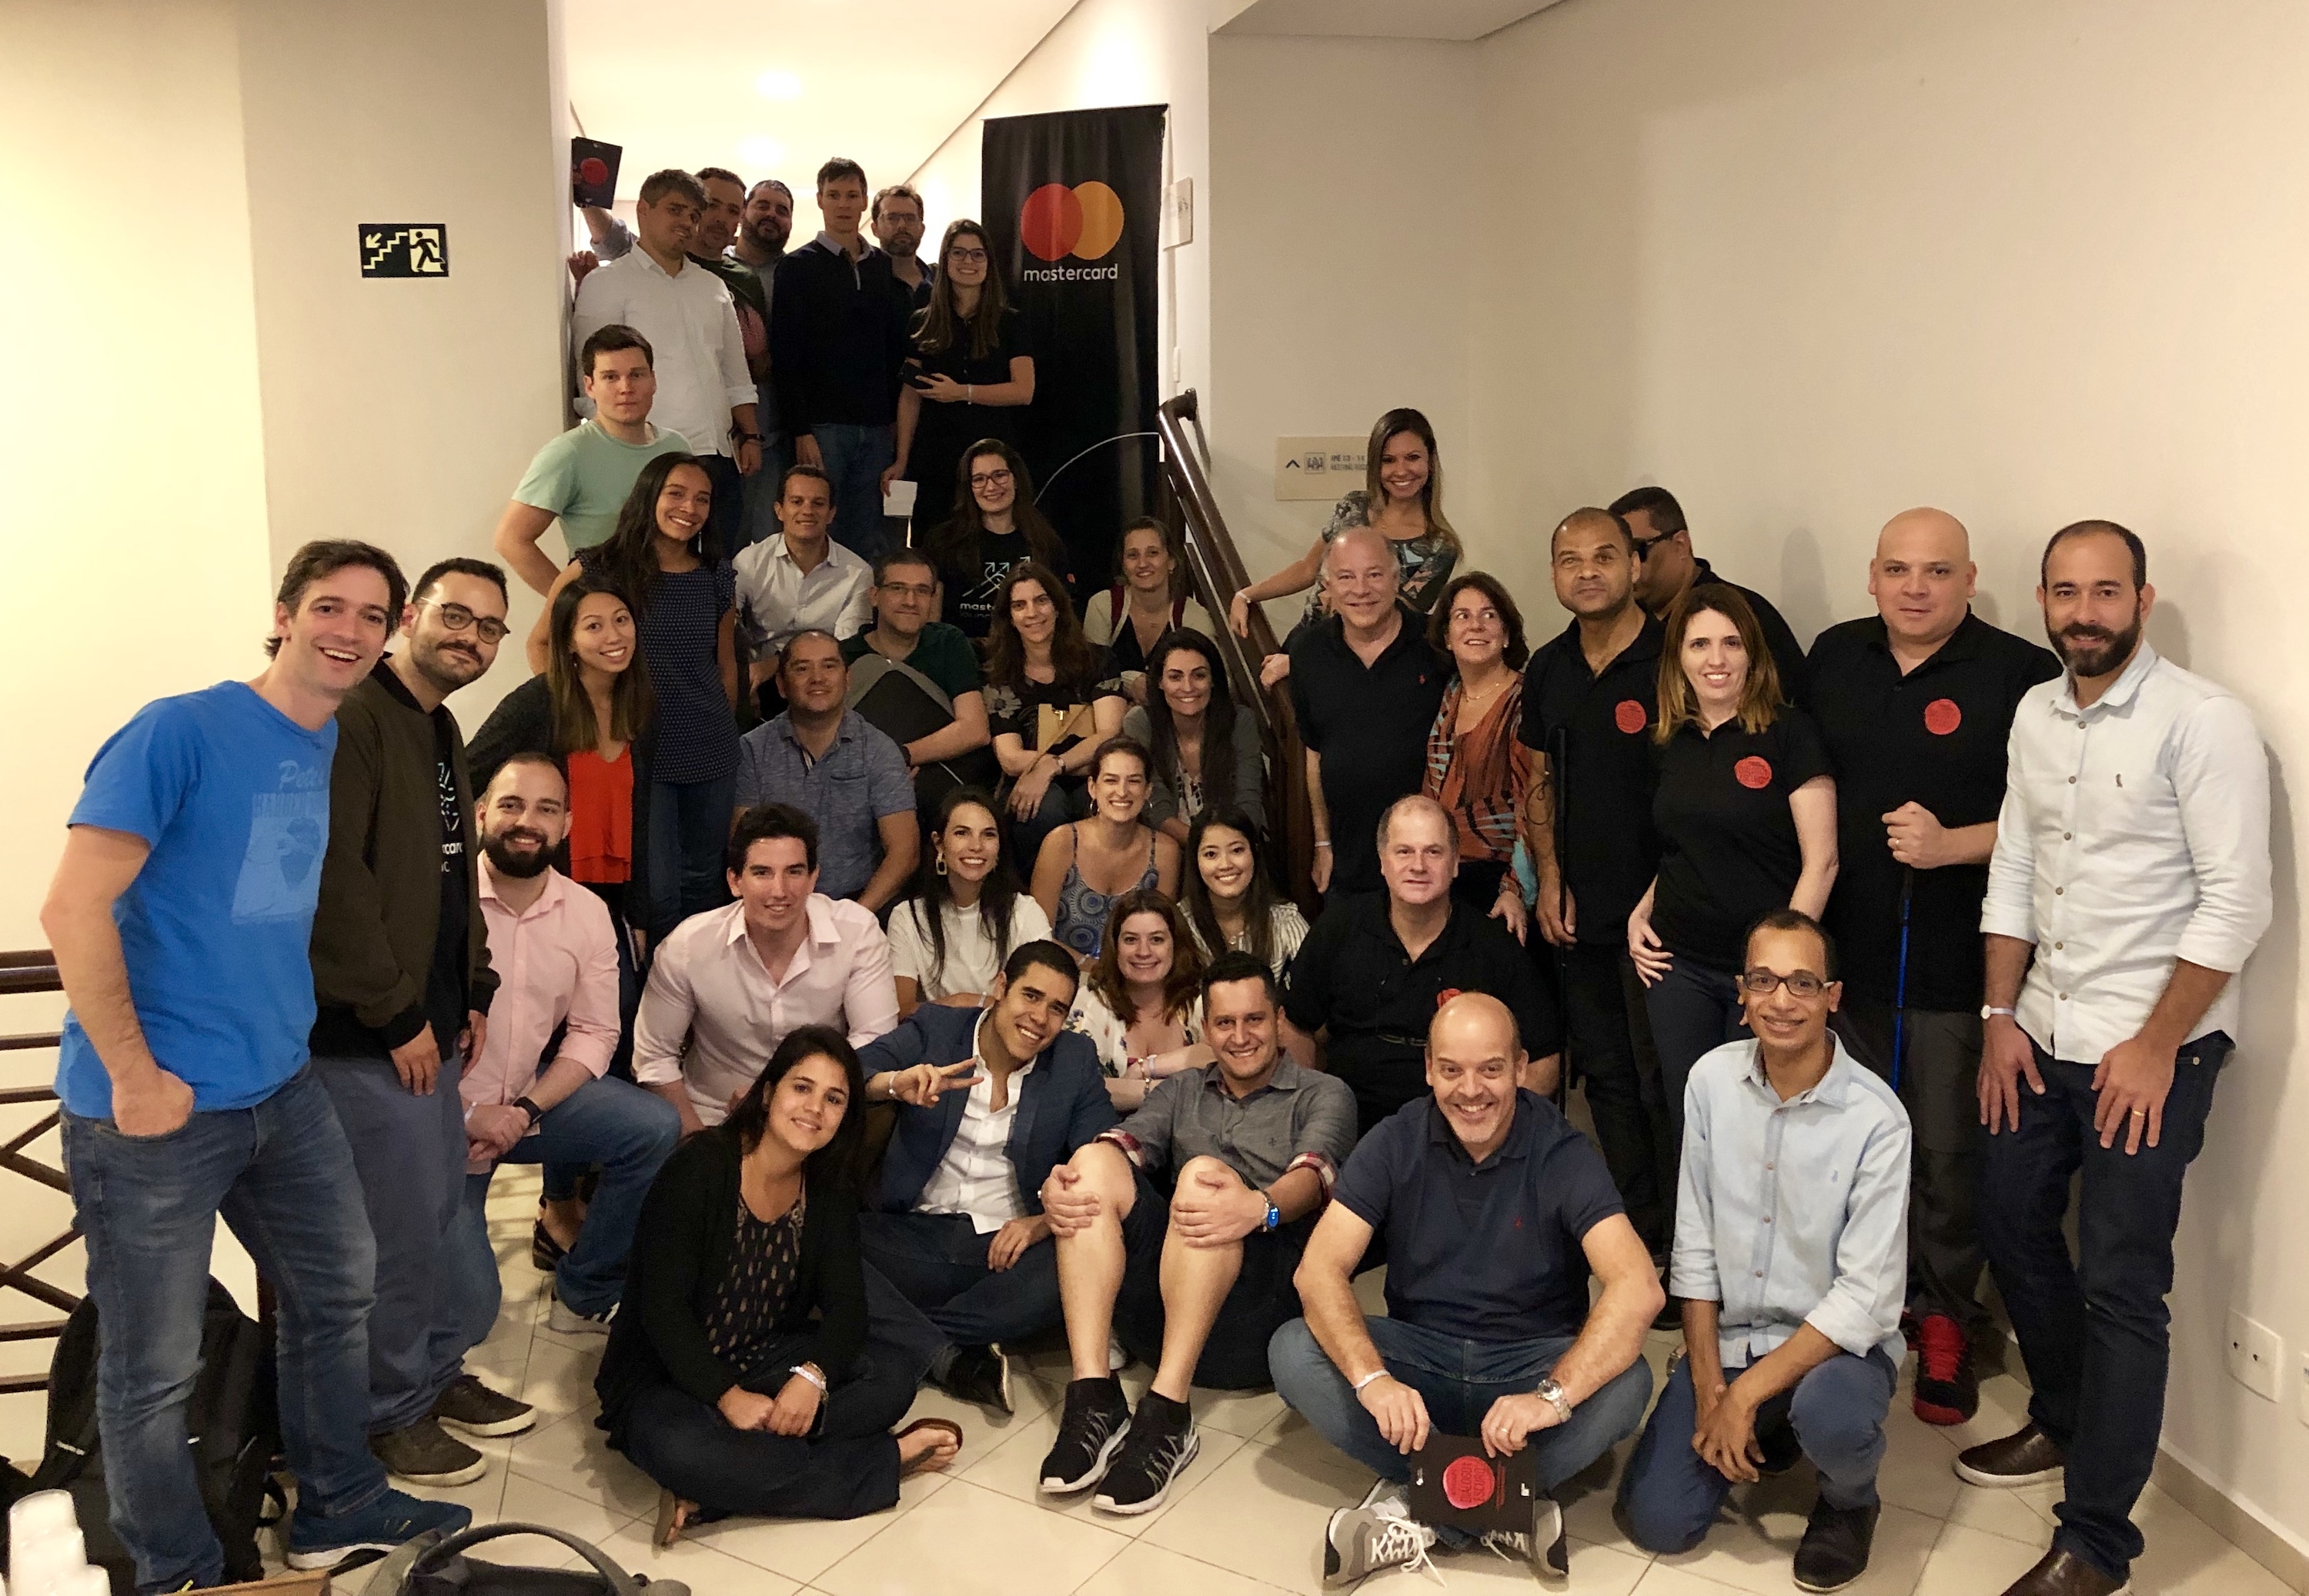 Workshop Mastercard - 3 Out 2019